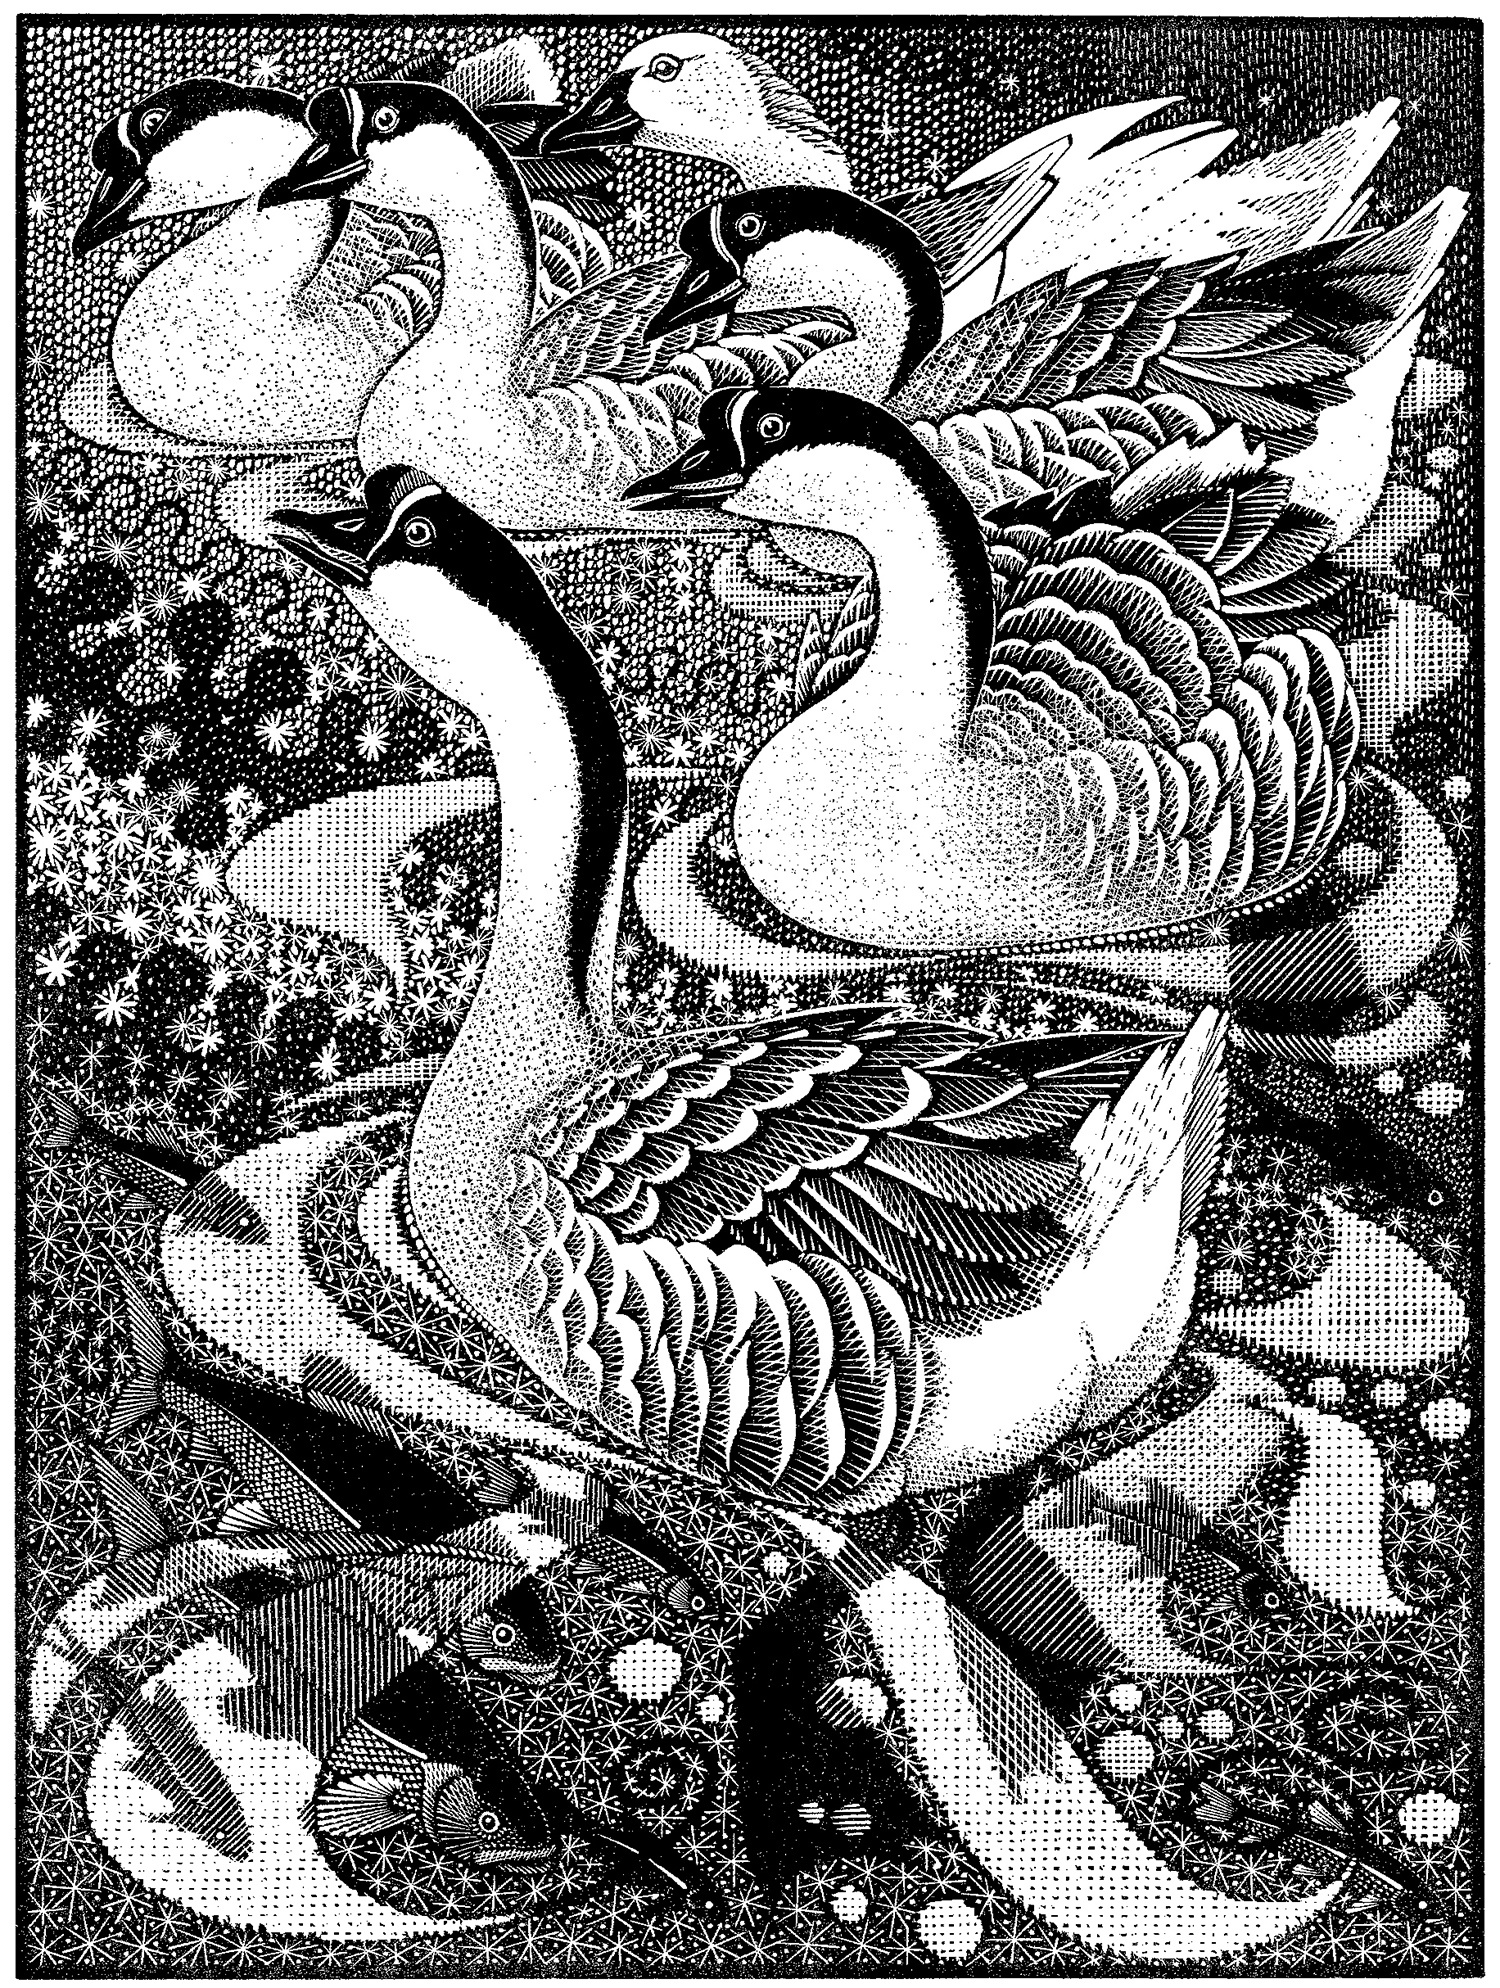 Gaggle of Geese II by Colin See-Paynton